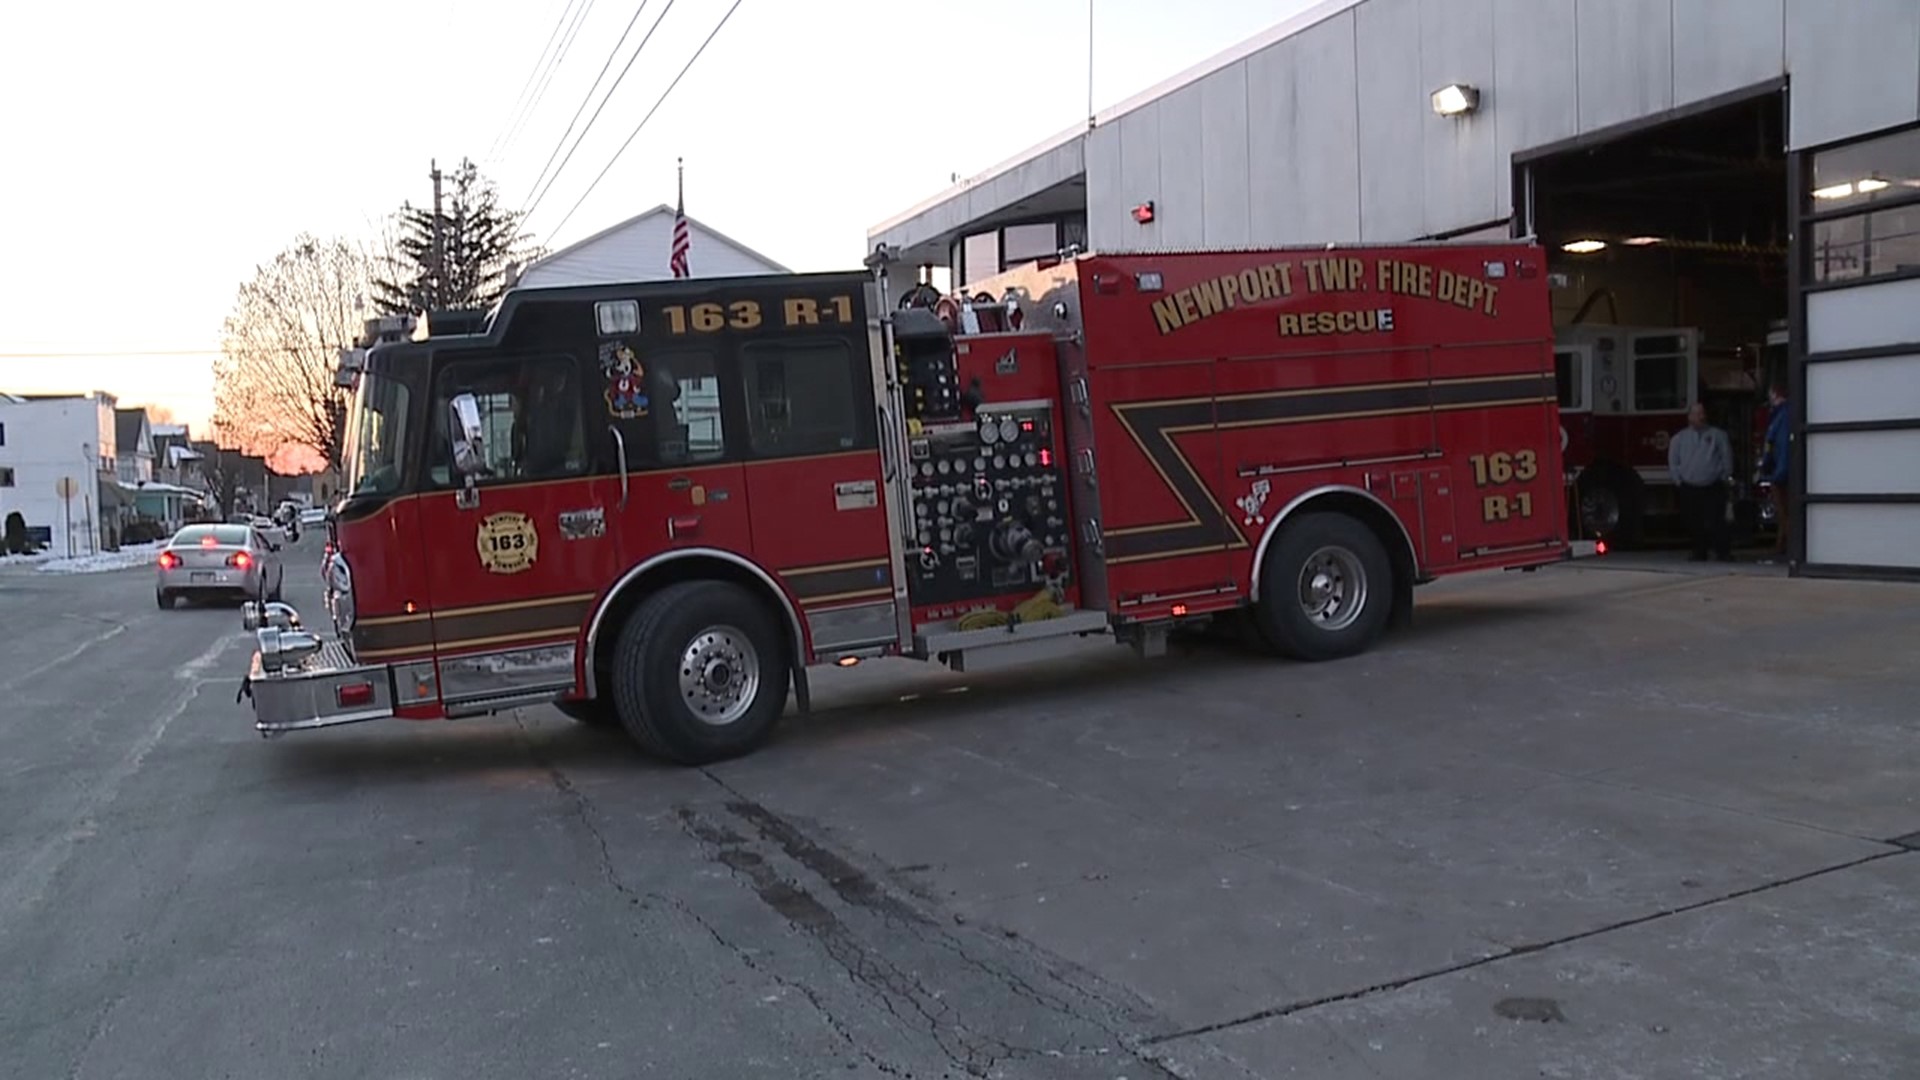 Crews in Luzerne County have been battling blazes in the blistering cold. Responding to calls one after another, firefighters have had no time to catch their breath.